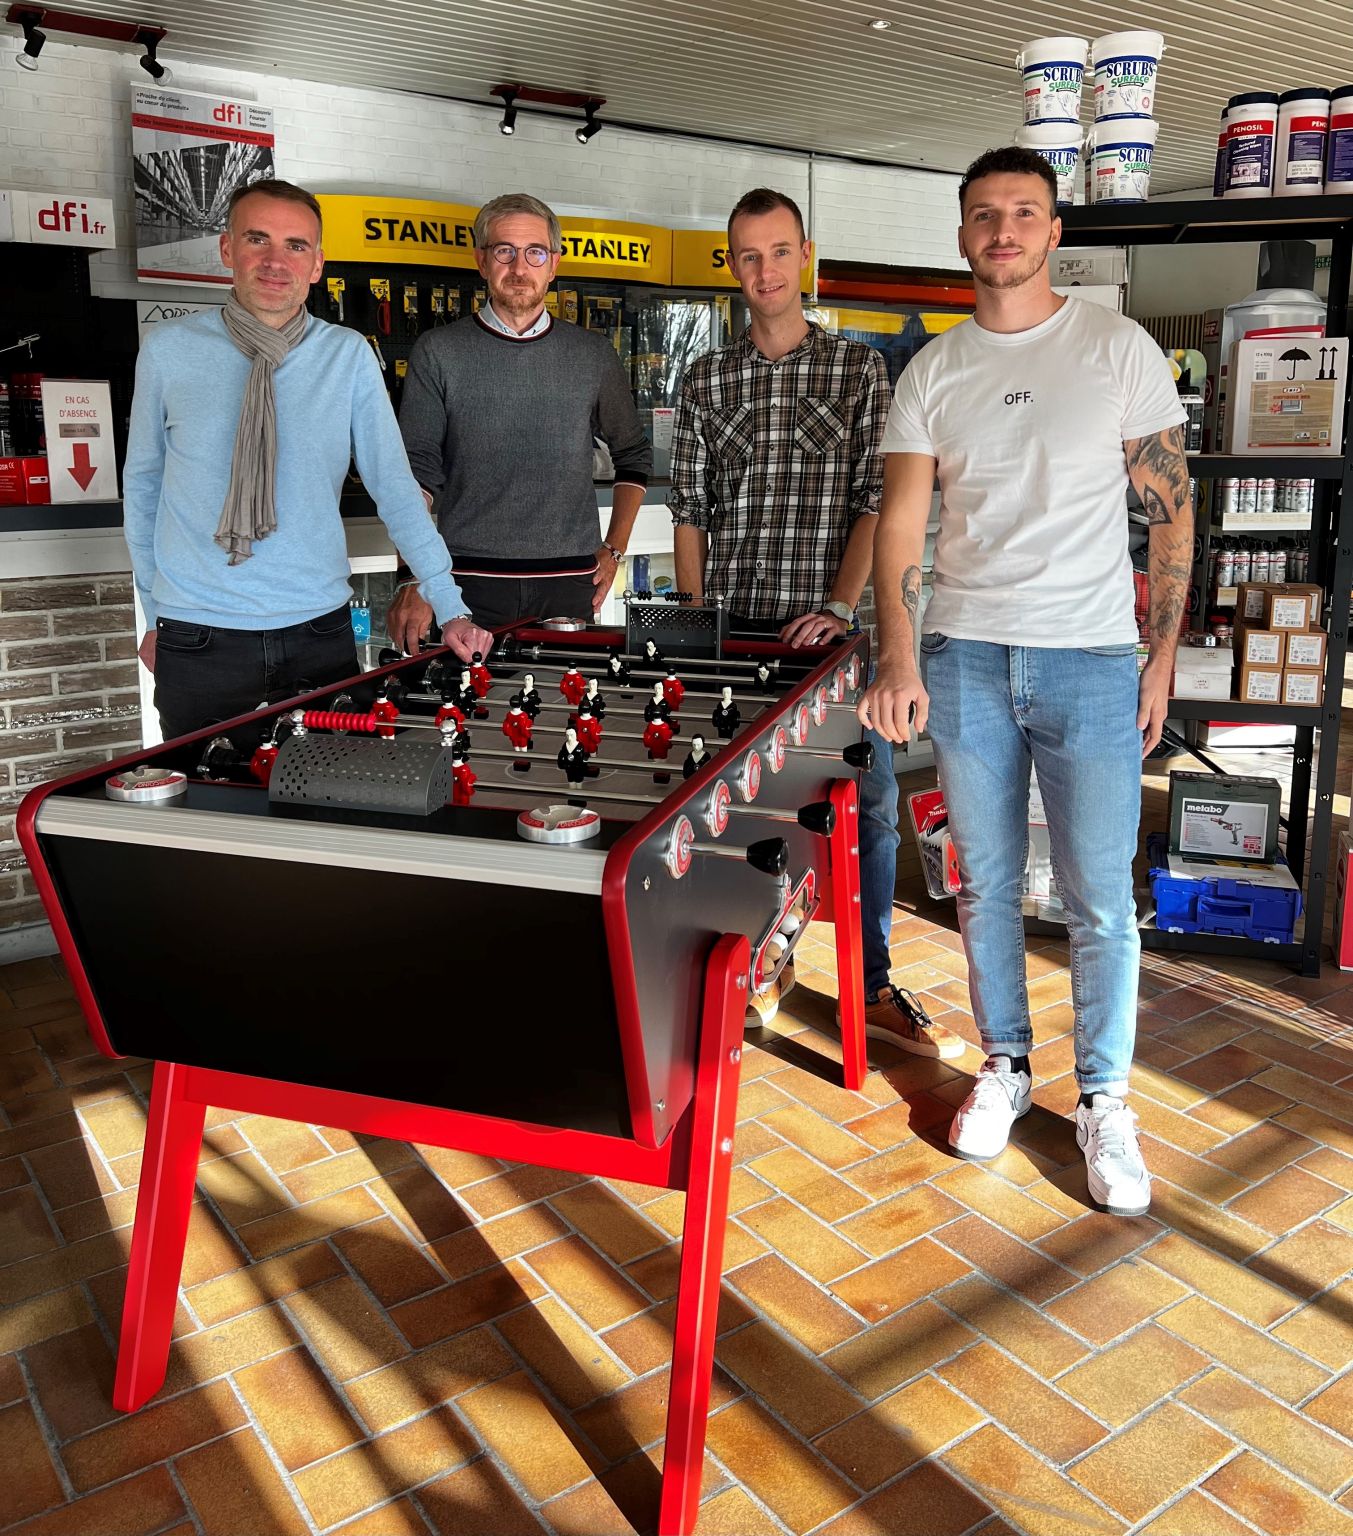 DFI team in front of their table soccer